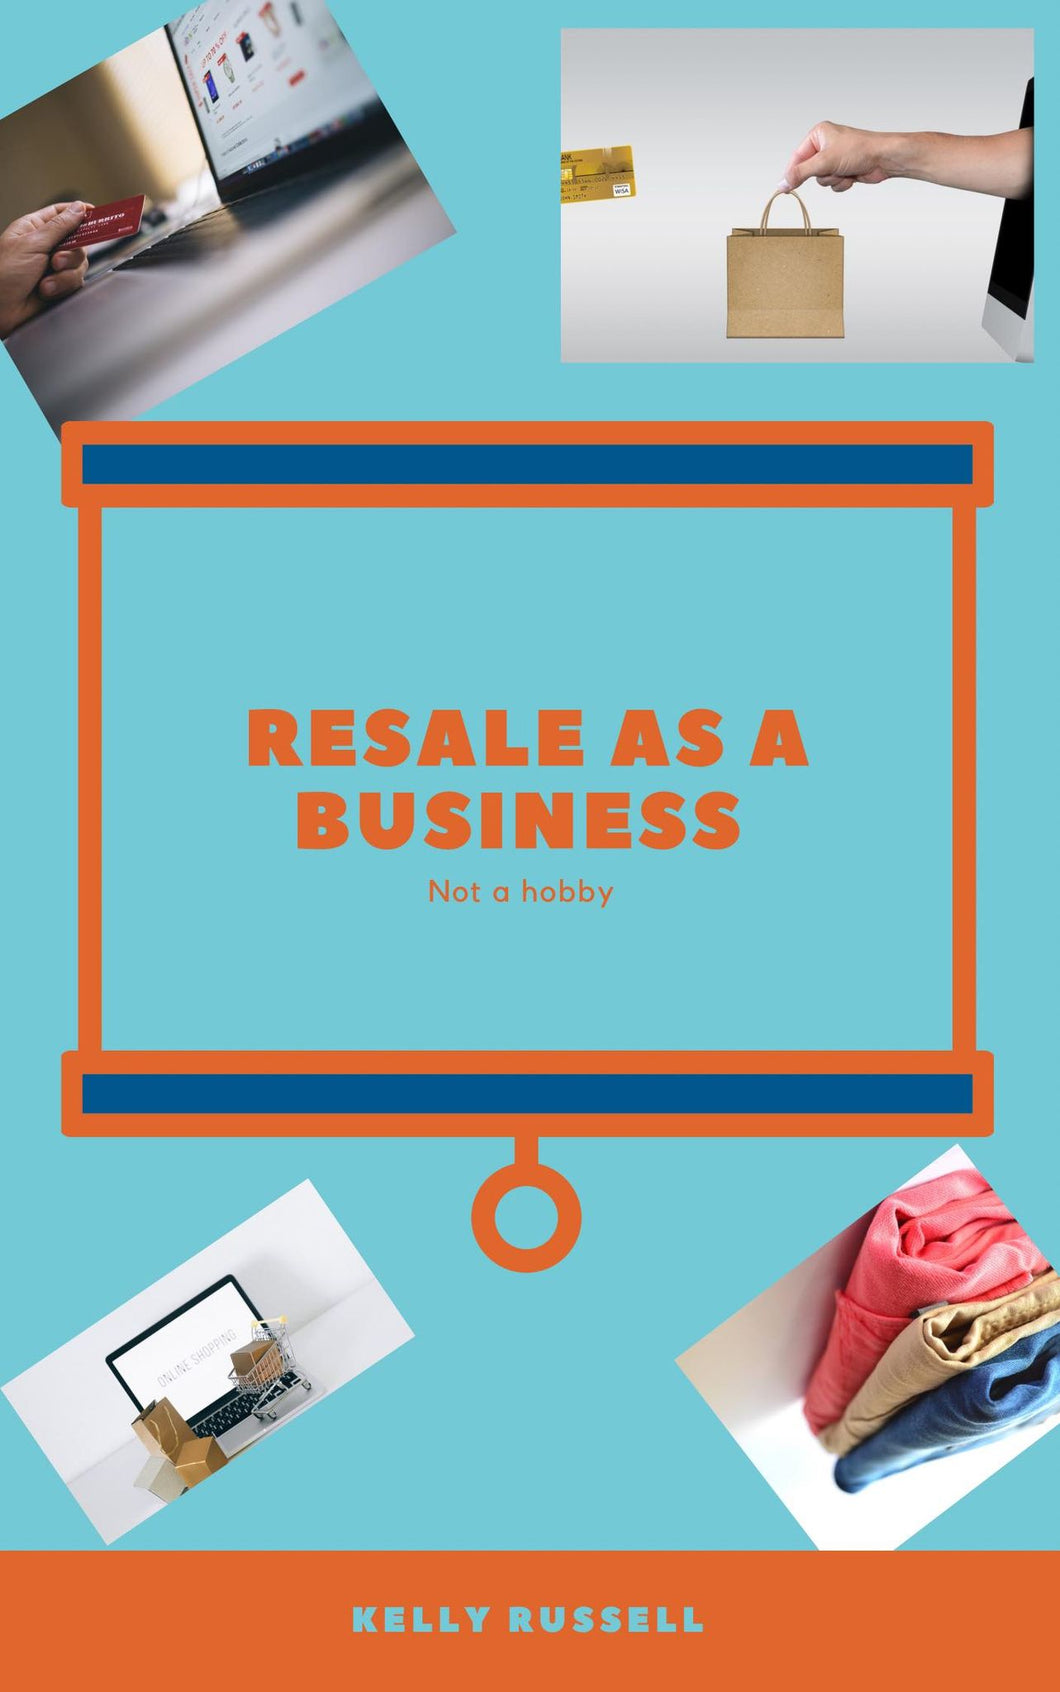 Resale as a business guide